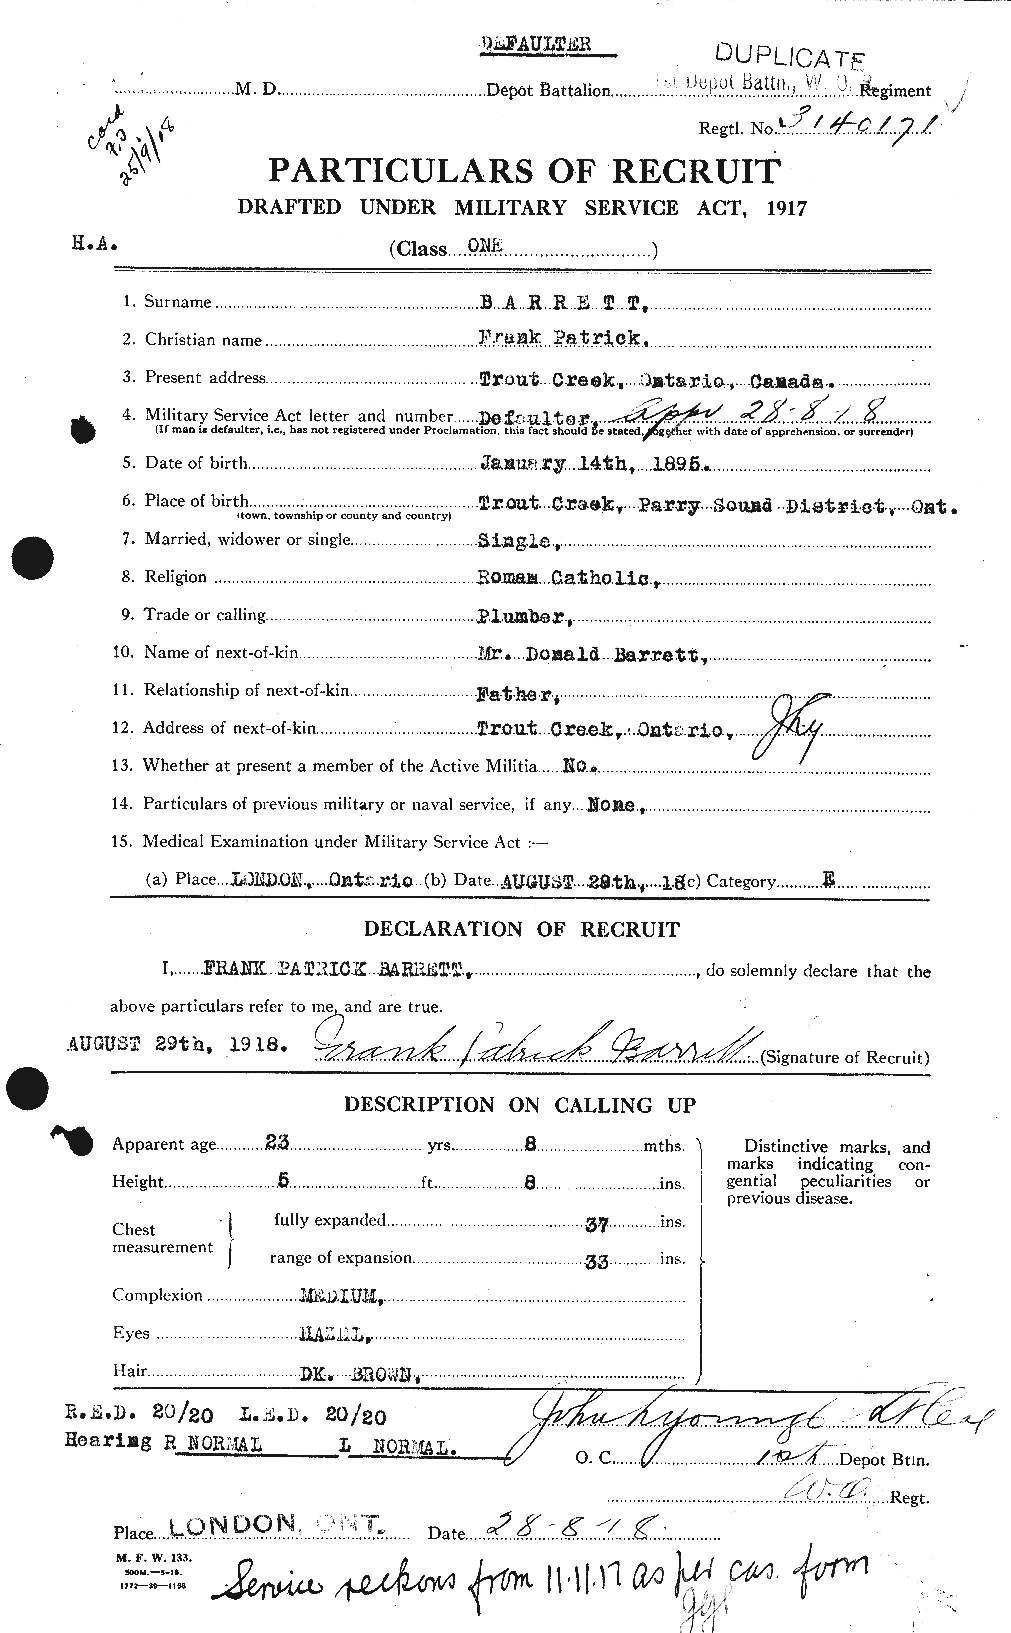 Personnel Records of the First World War - CEF 220338a